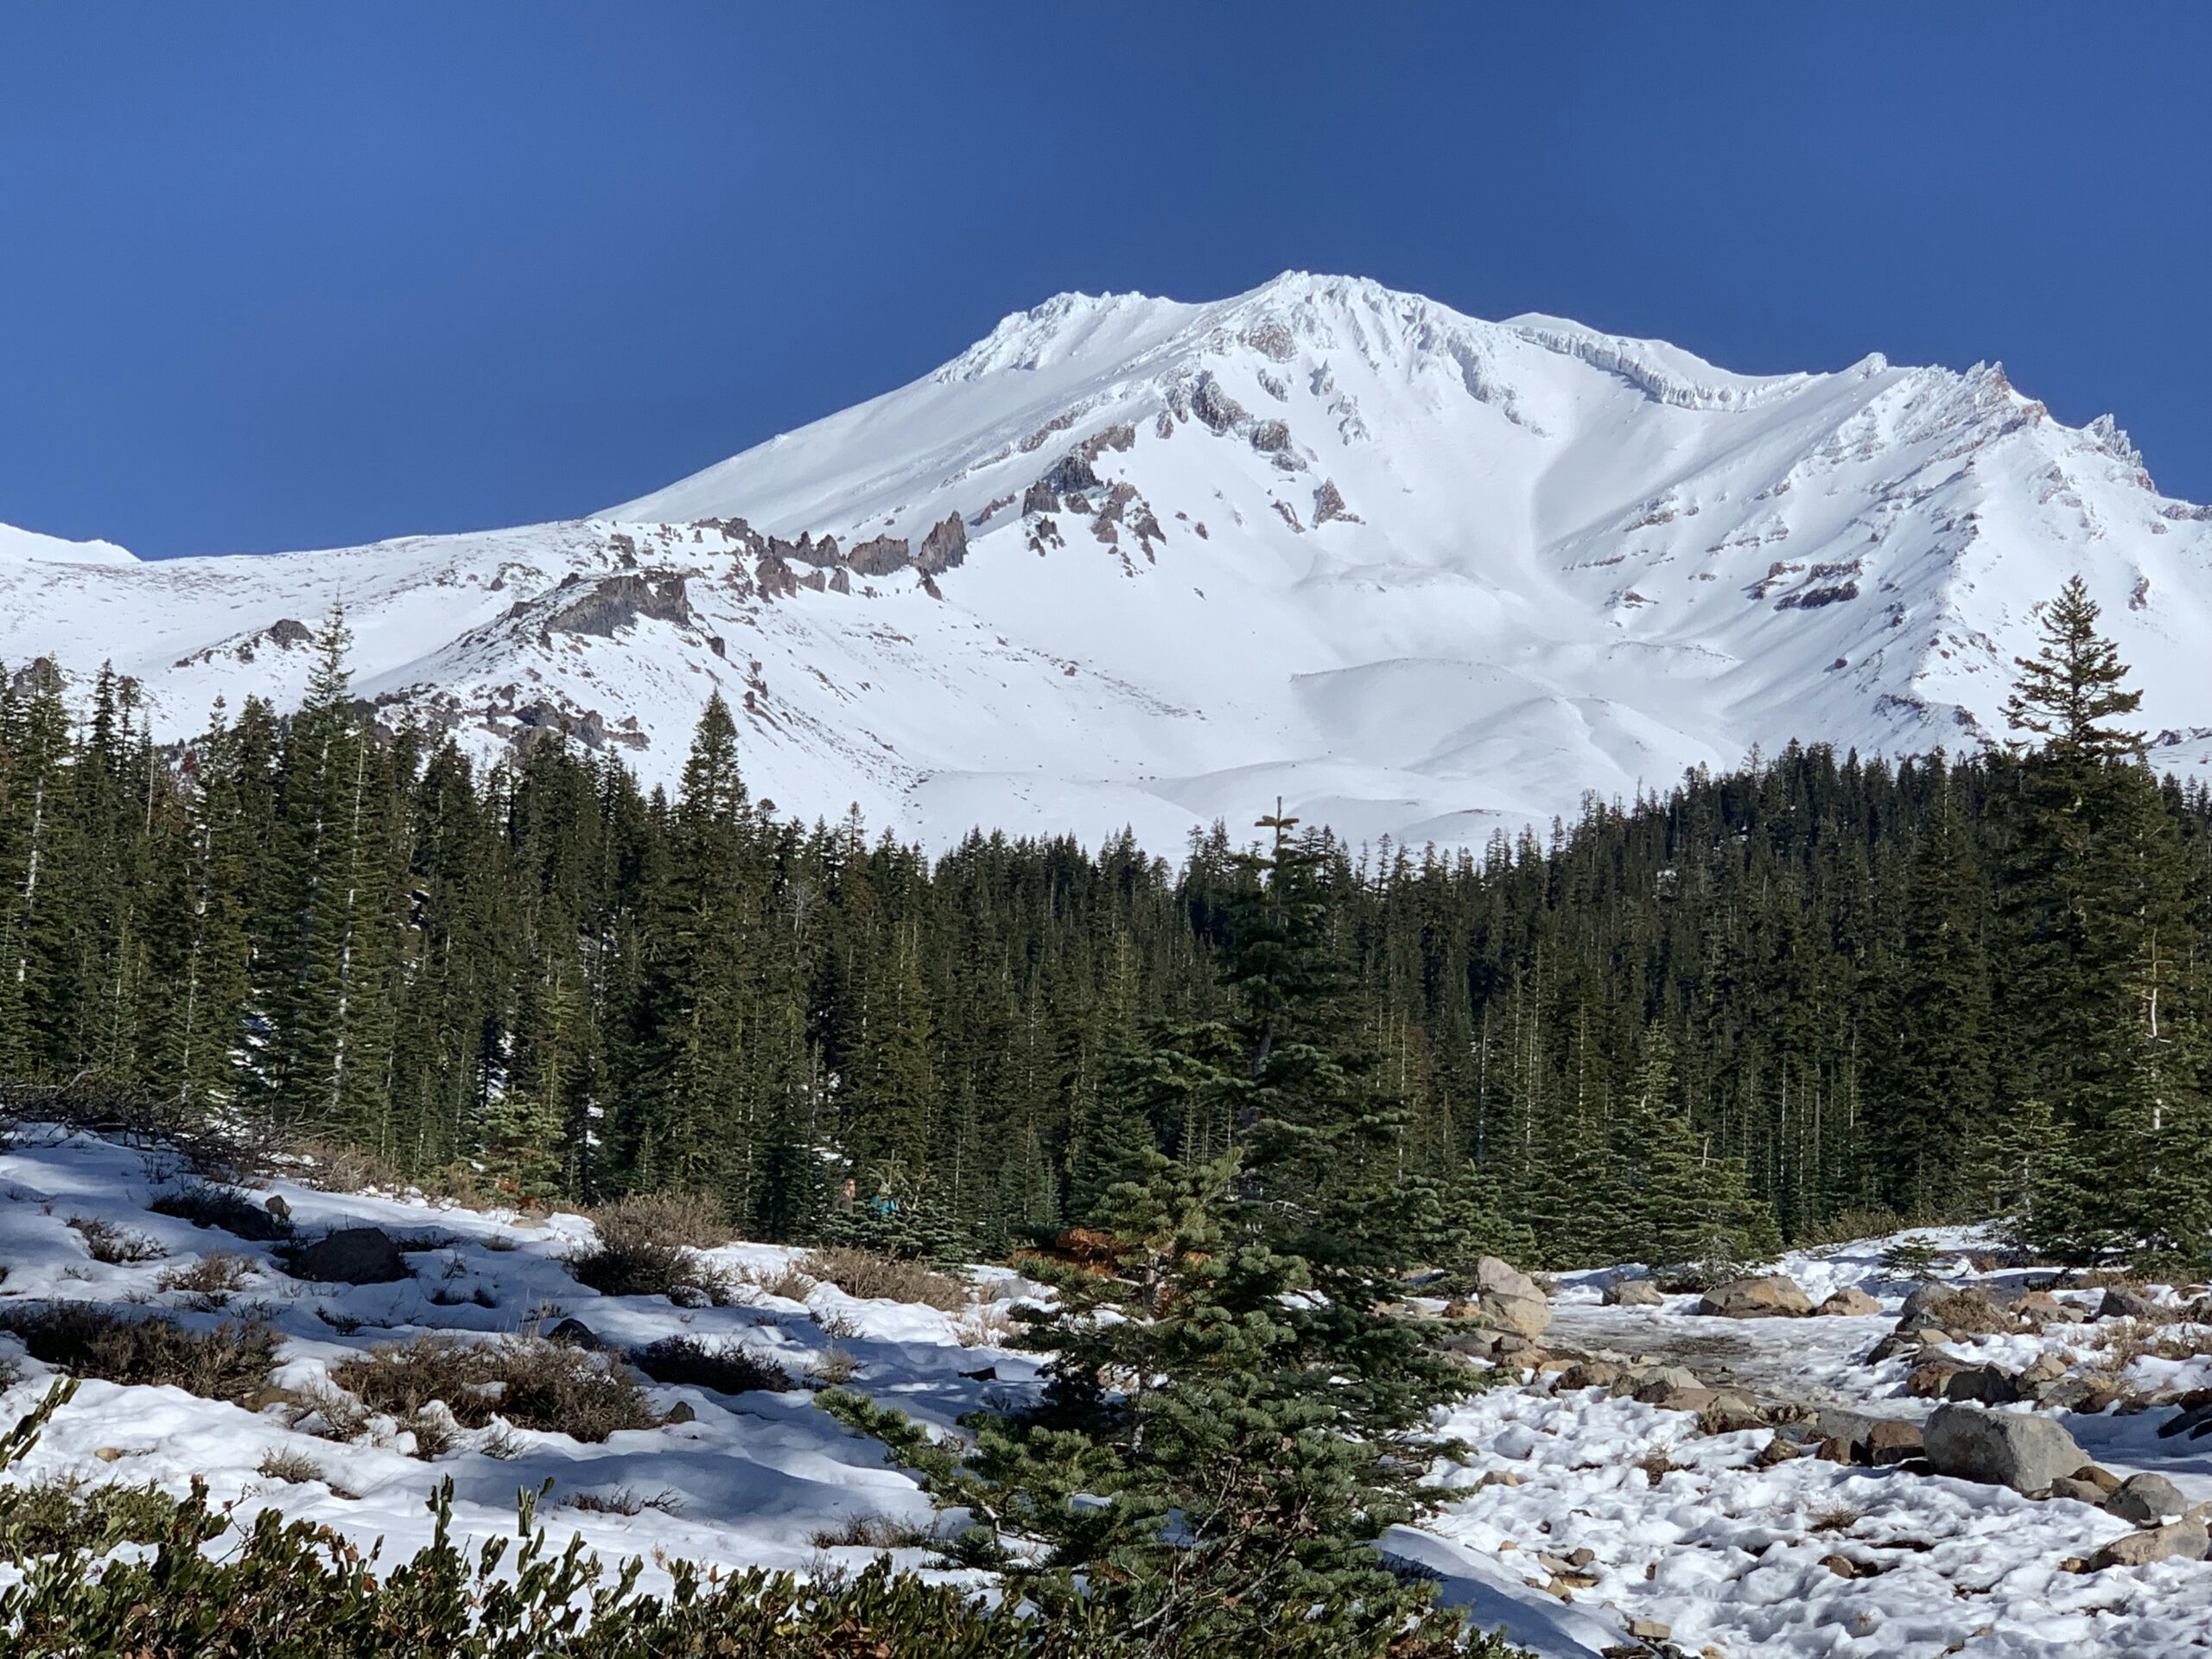 Are There Any Accessible Trails For People With Disabilities On Mount Shasta?